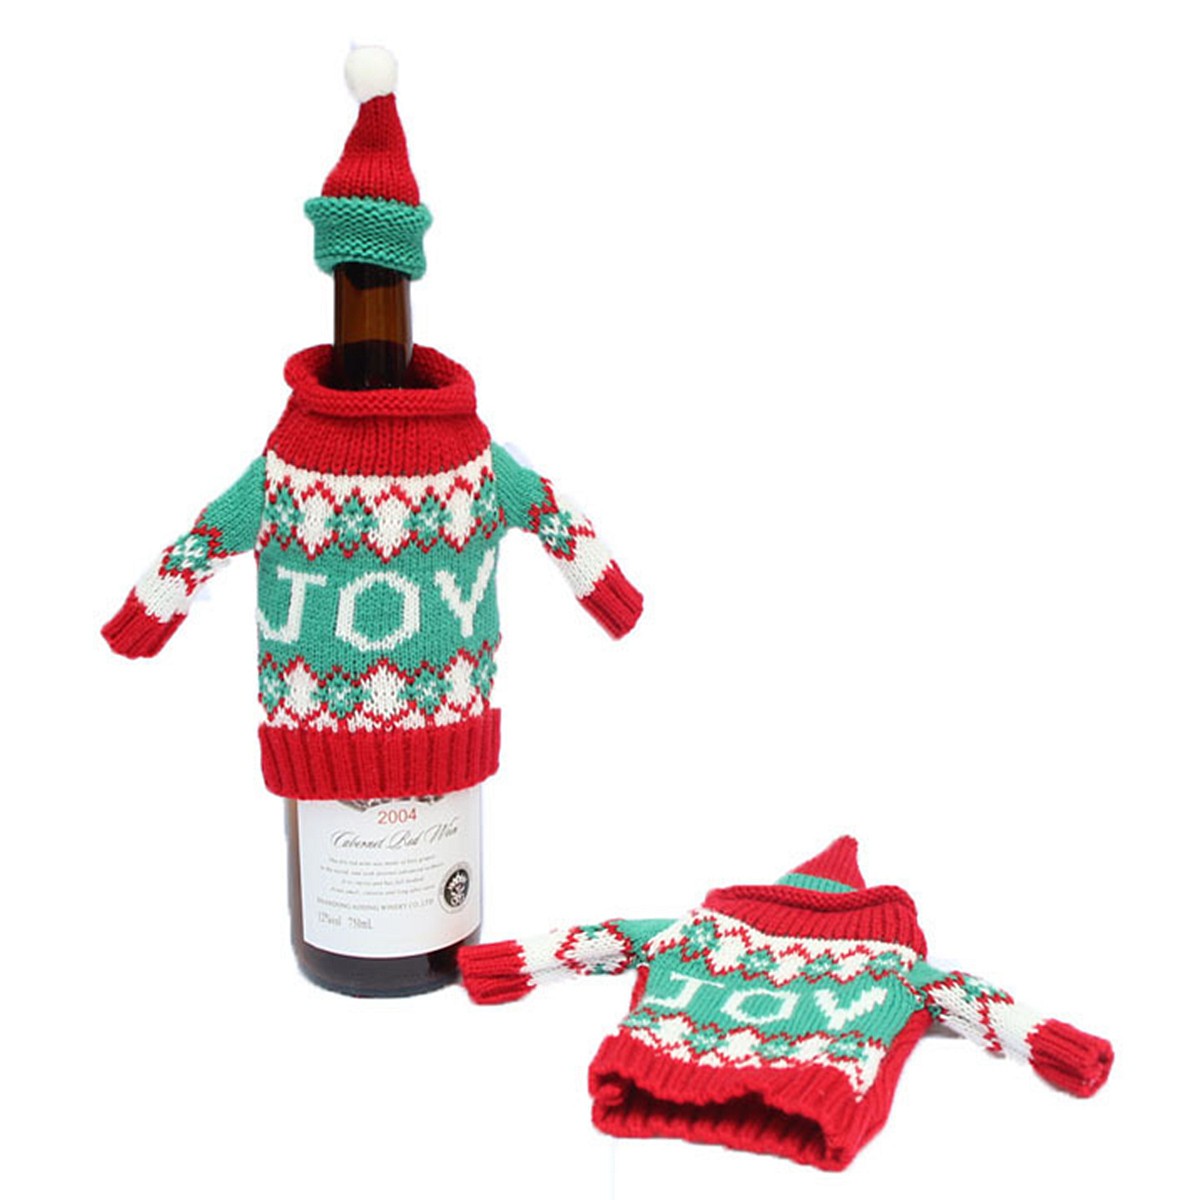 Christmas-Knitted-Sweater-Lid-Hat-Wine-Bottle-Cover-Wrap-Bag-Xmas-Decoration-1106367-5